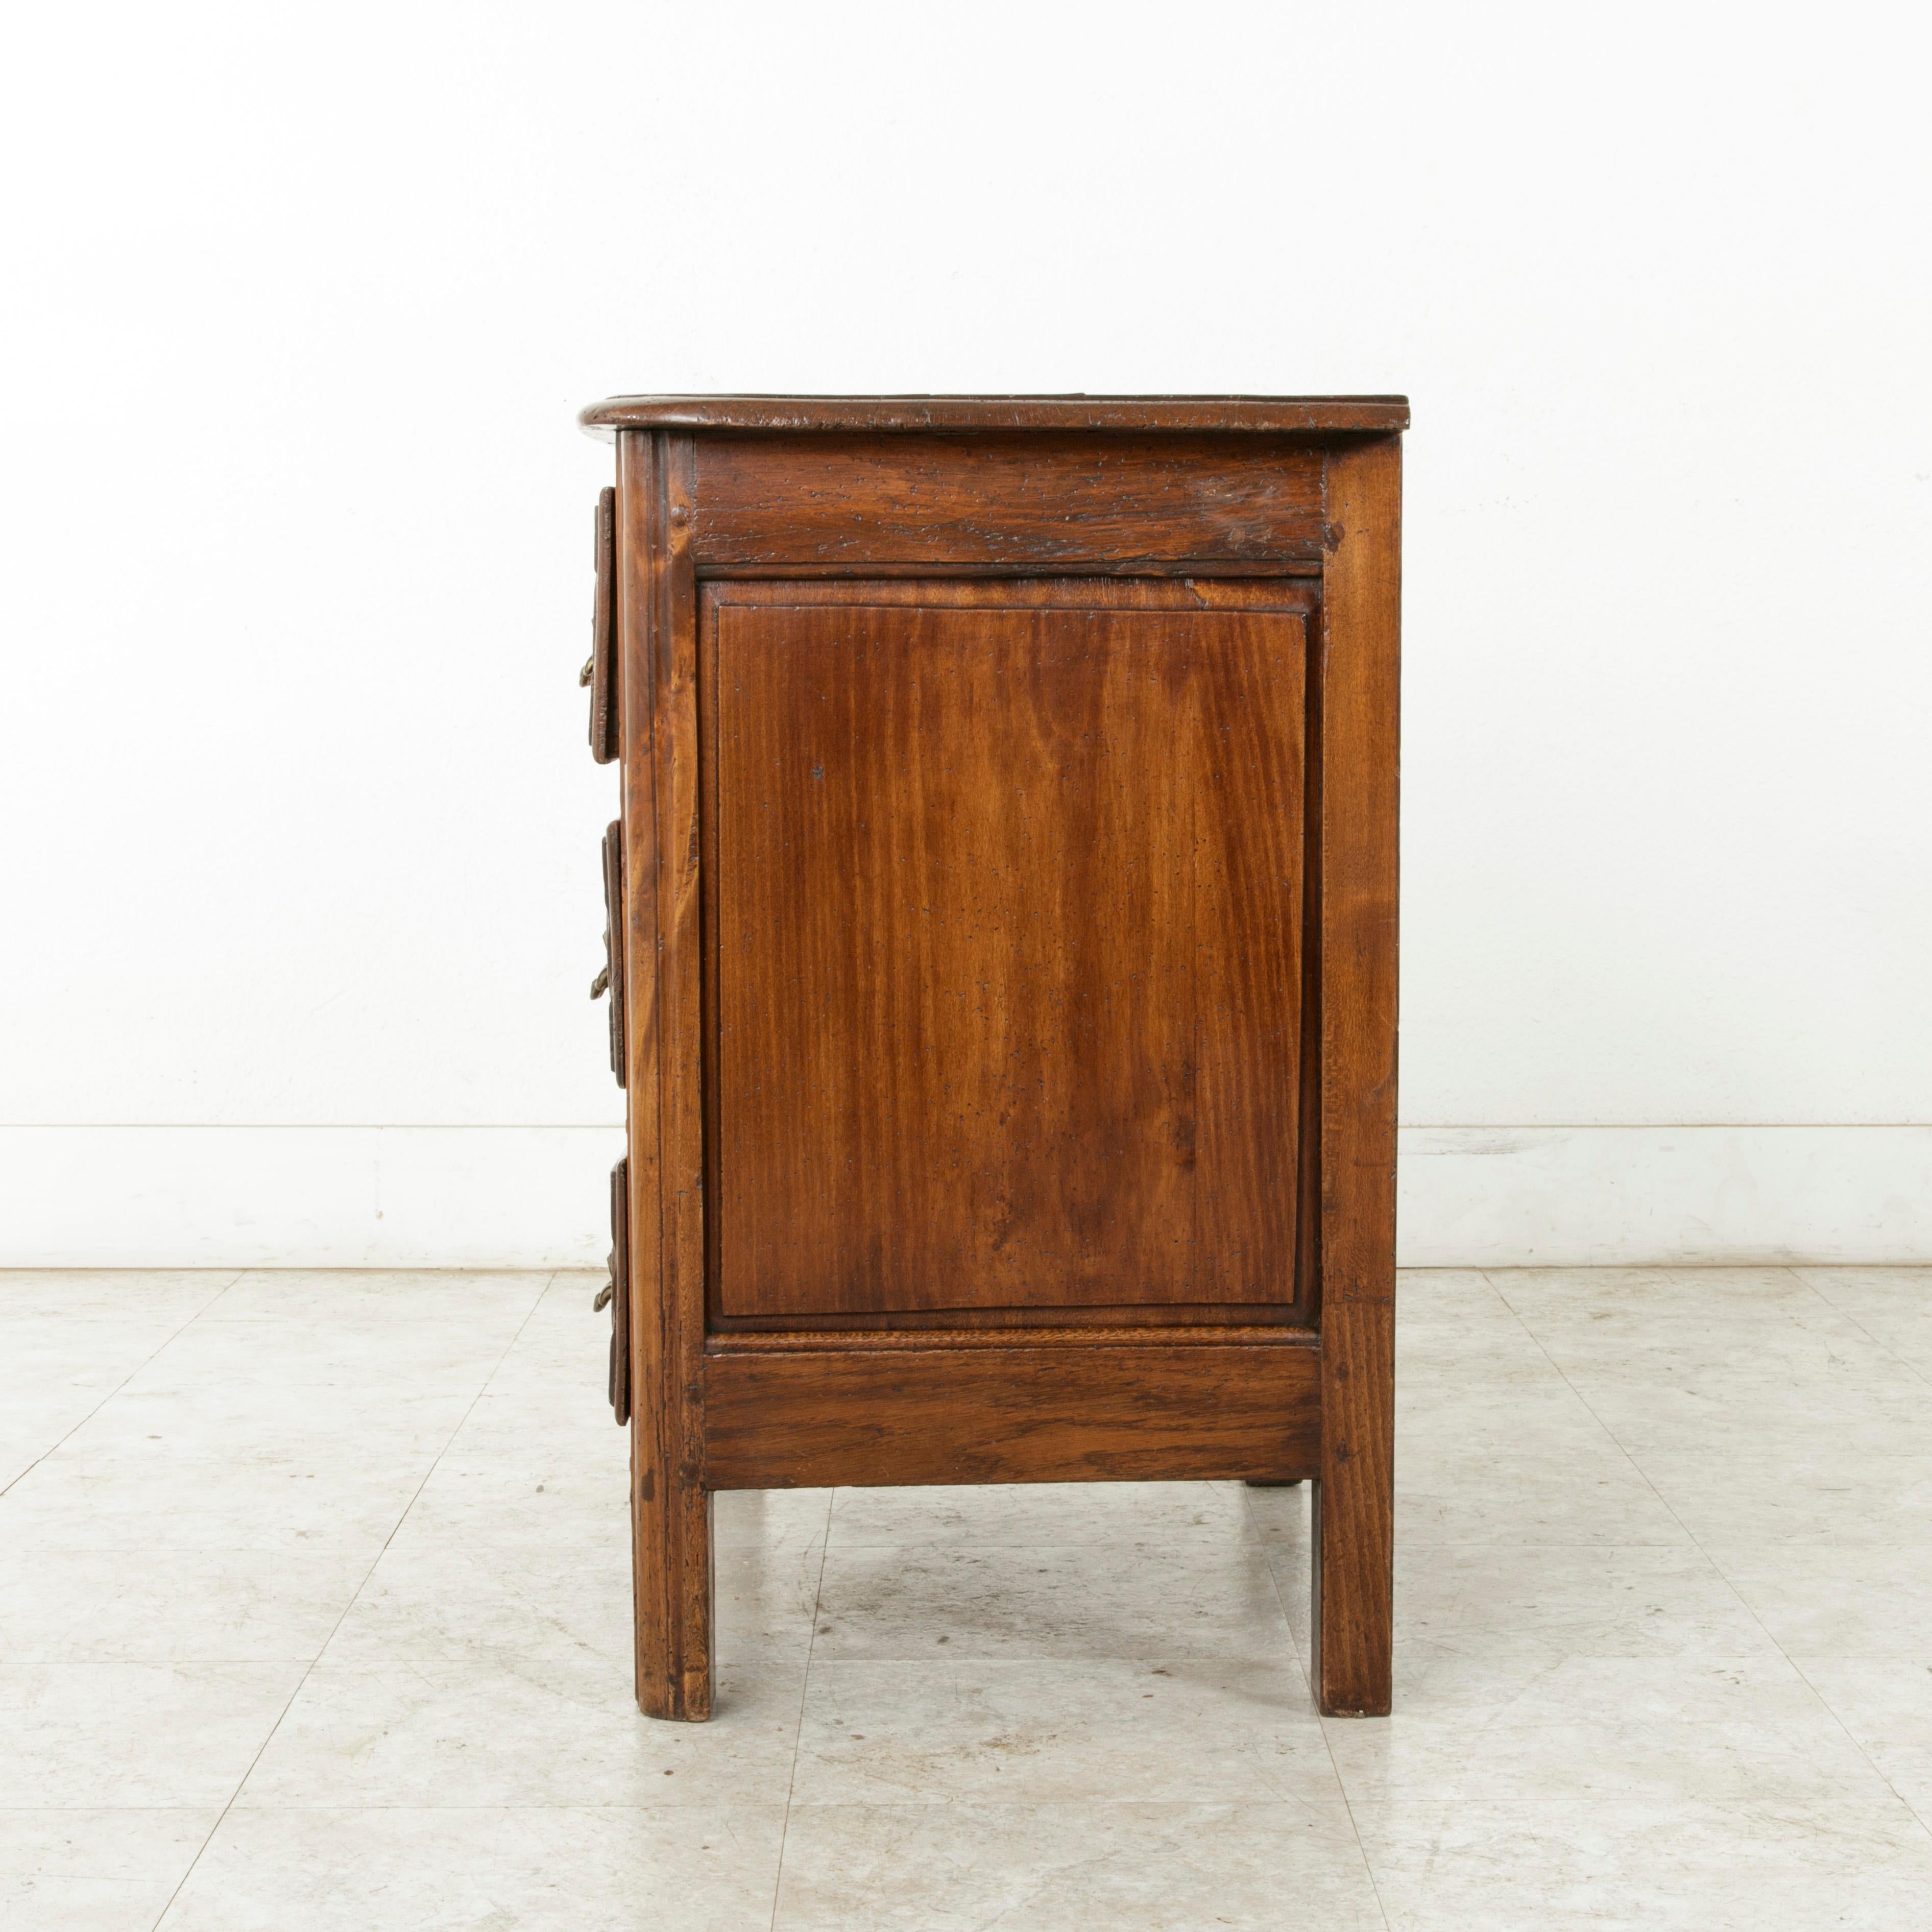 Hand-Carved Mid-18th Century French Louis XIV Period Hand Carved Chestnut Commode or Chest